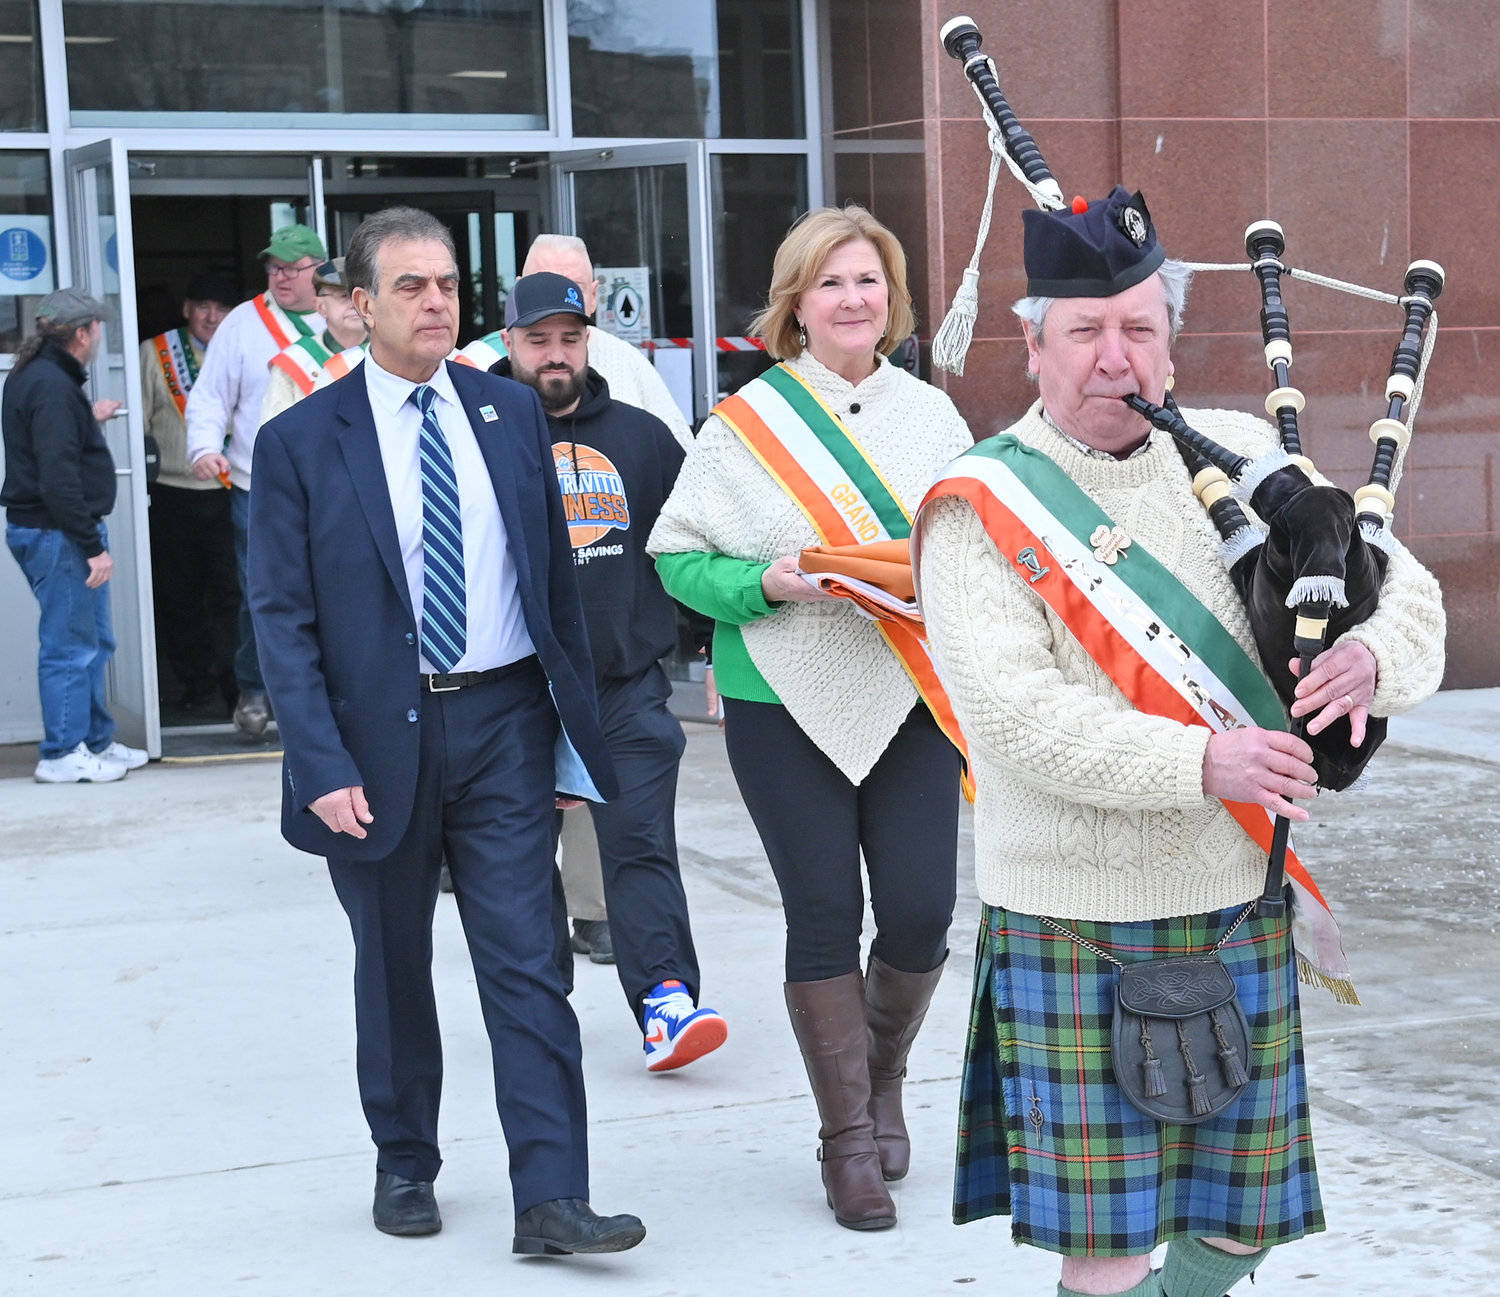 LEADING THE WAY — Bagpiper Dr. Daniel Murphy leads Mayor Robert Palmieri and Colleen Kain Martin, the grand marshal of the upcoming St. Patrick’s Day Parade in Utica, as they head out of Utica City Hall and toward’s the flag pole as they prepare to hoist the Irish flag on Wednesday afternoon.